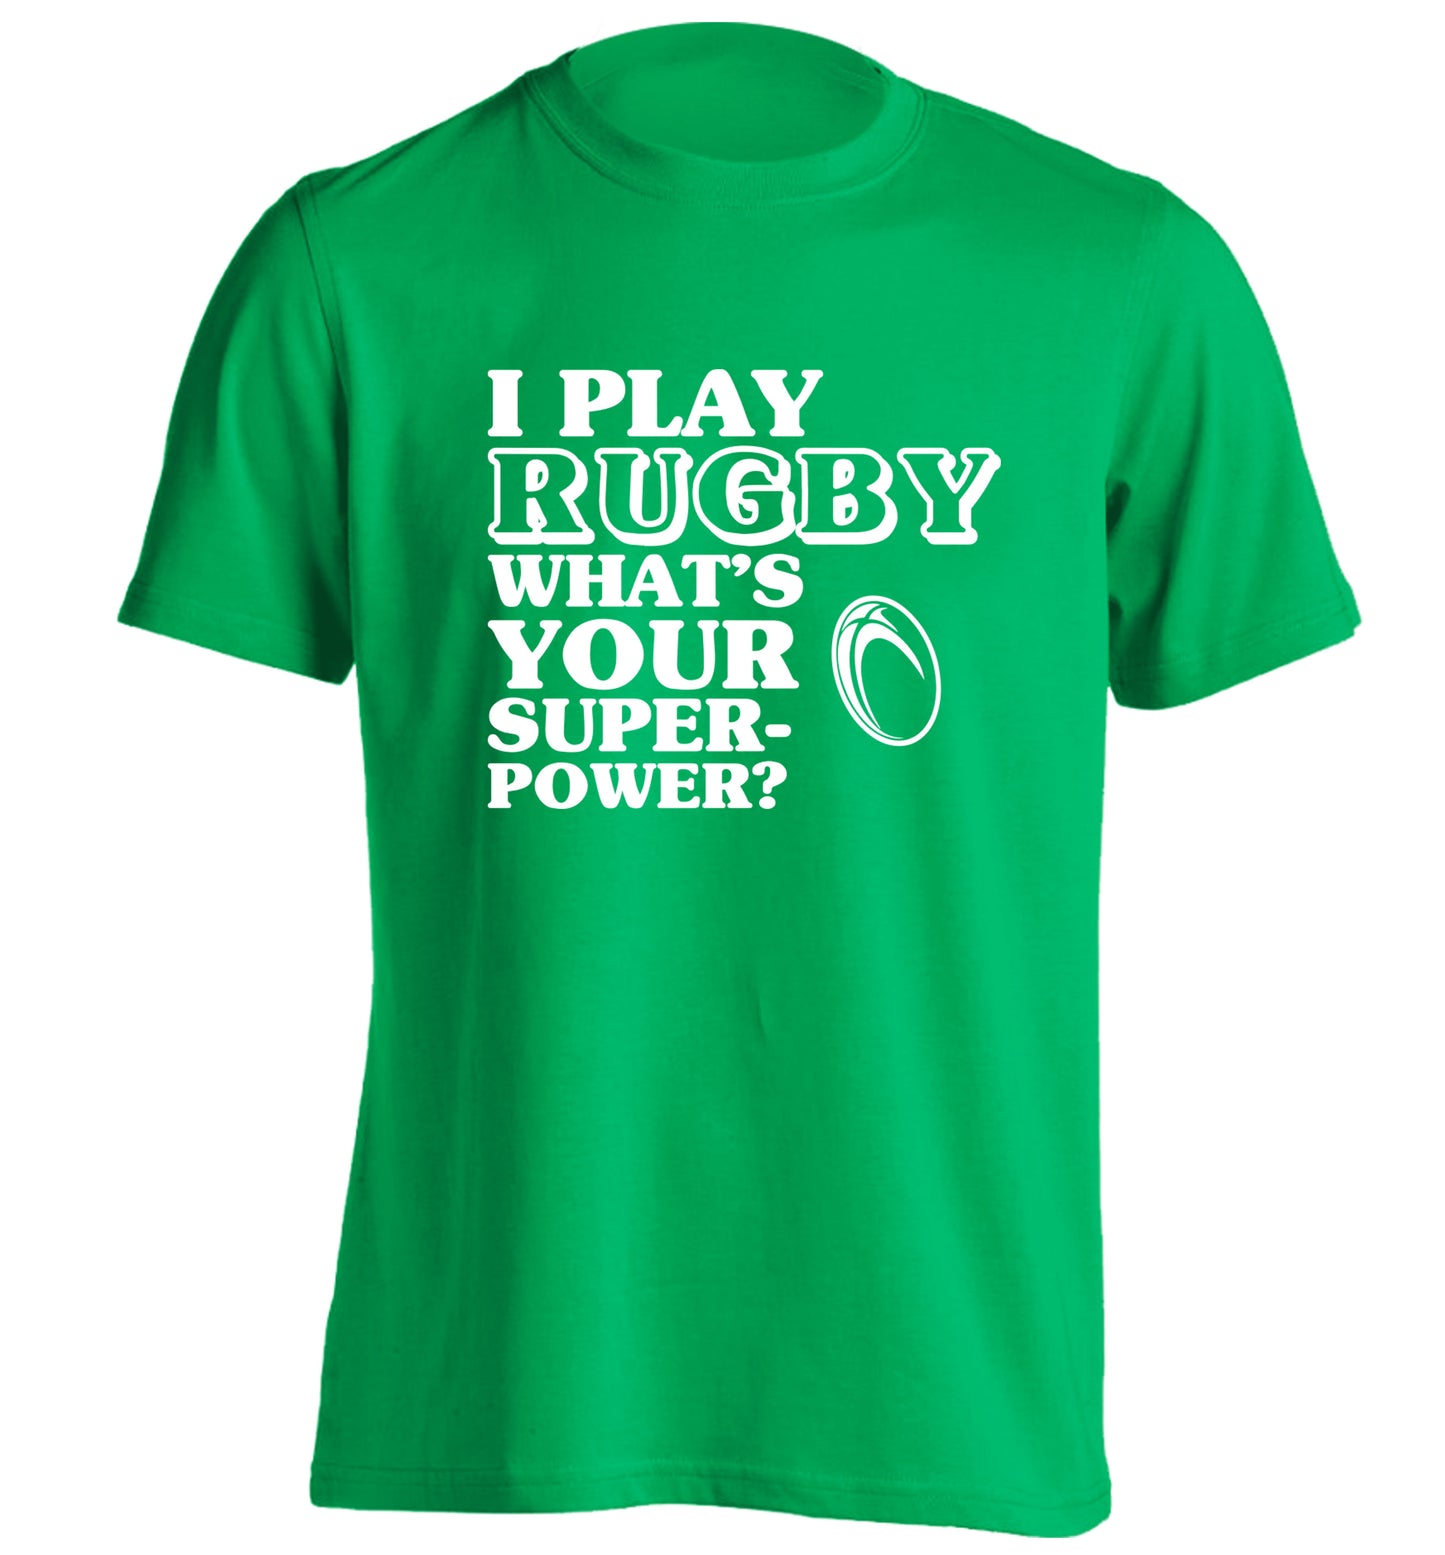 I play rugby what's your superpower? adults unisex green Tshirt 2XL